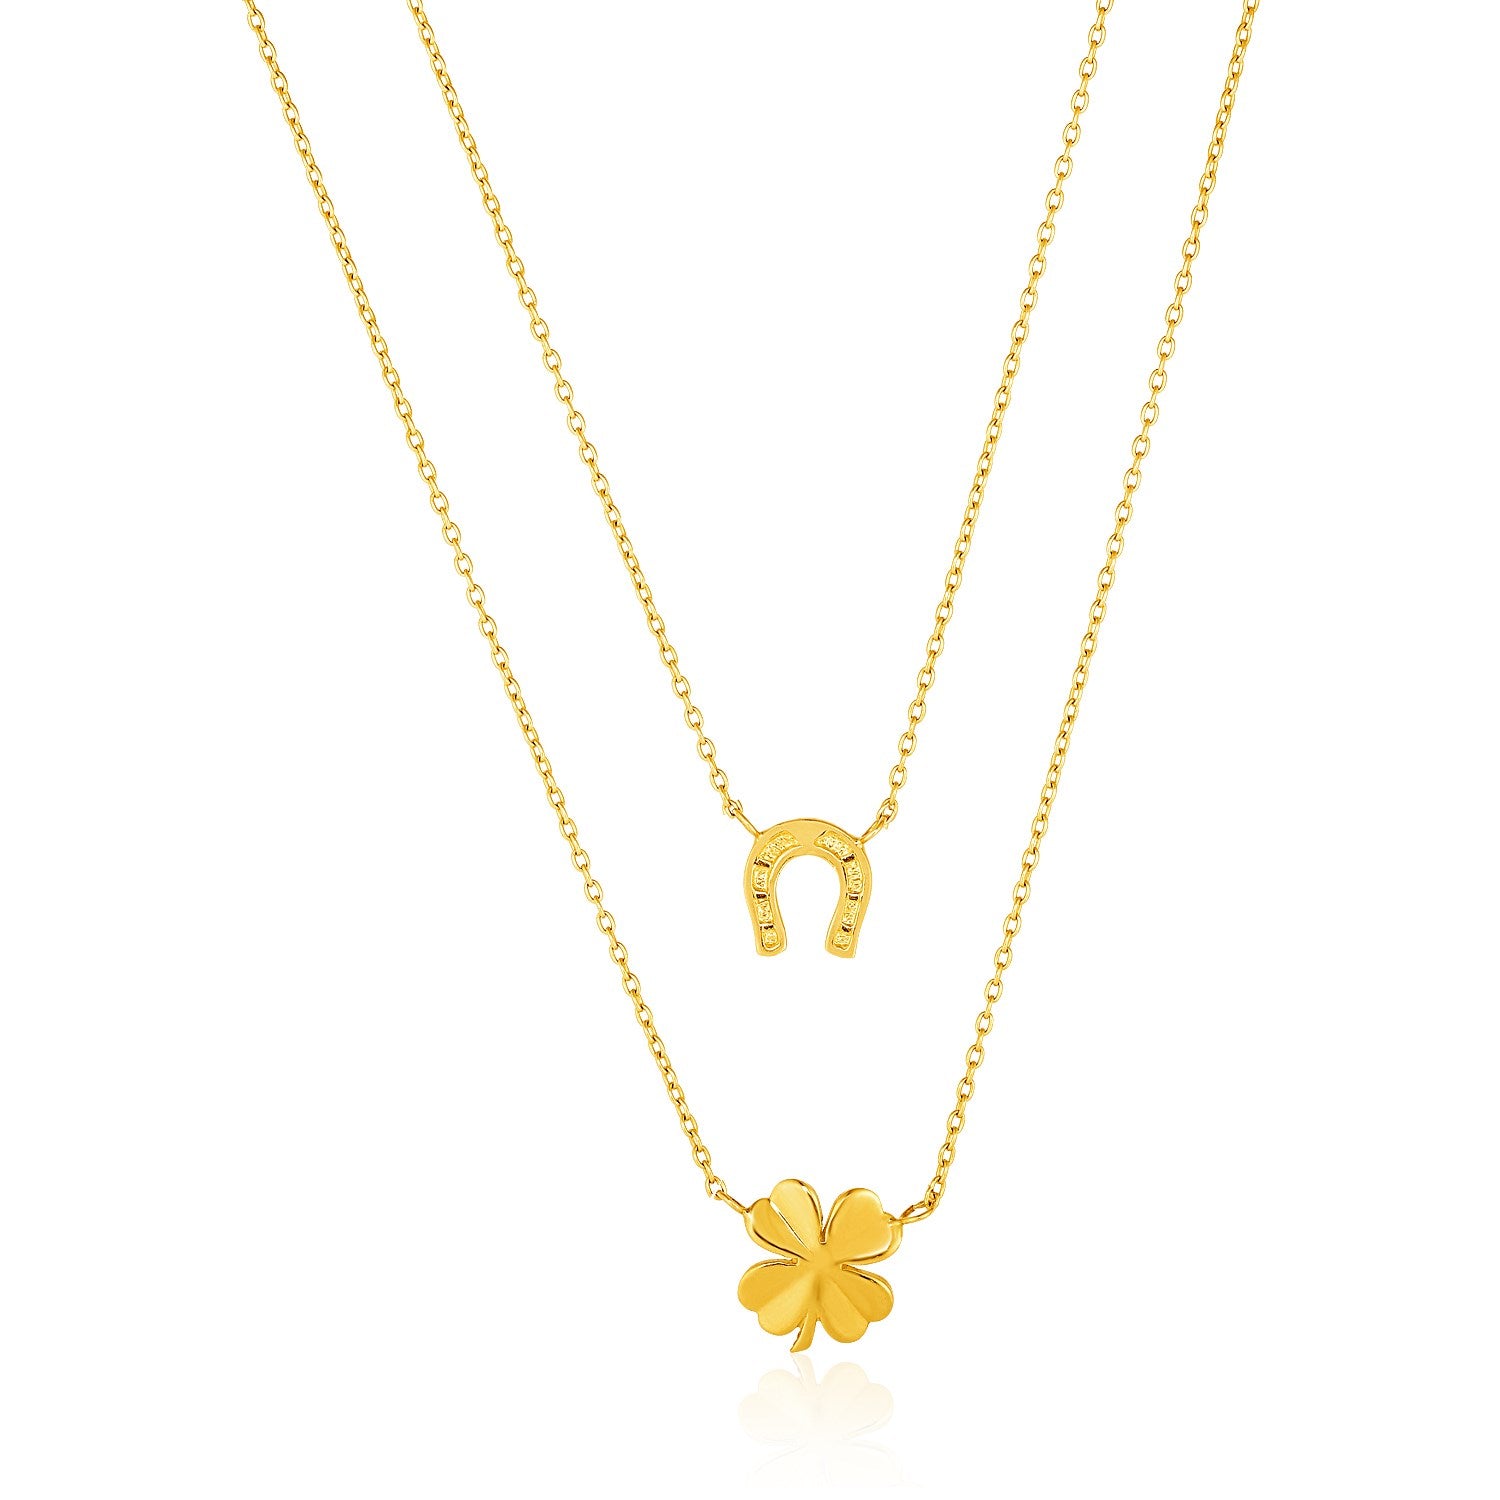 14k Yellow Gold Double-Strand Chain Necklace with Four-Leaf Clover and Horseshoe